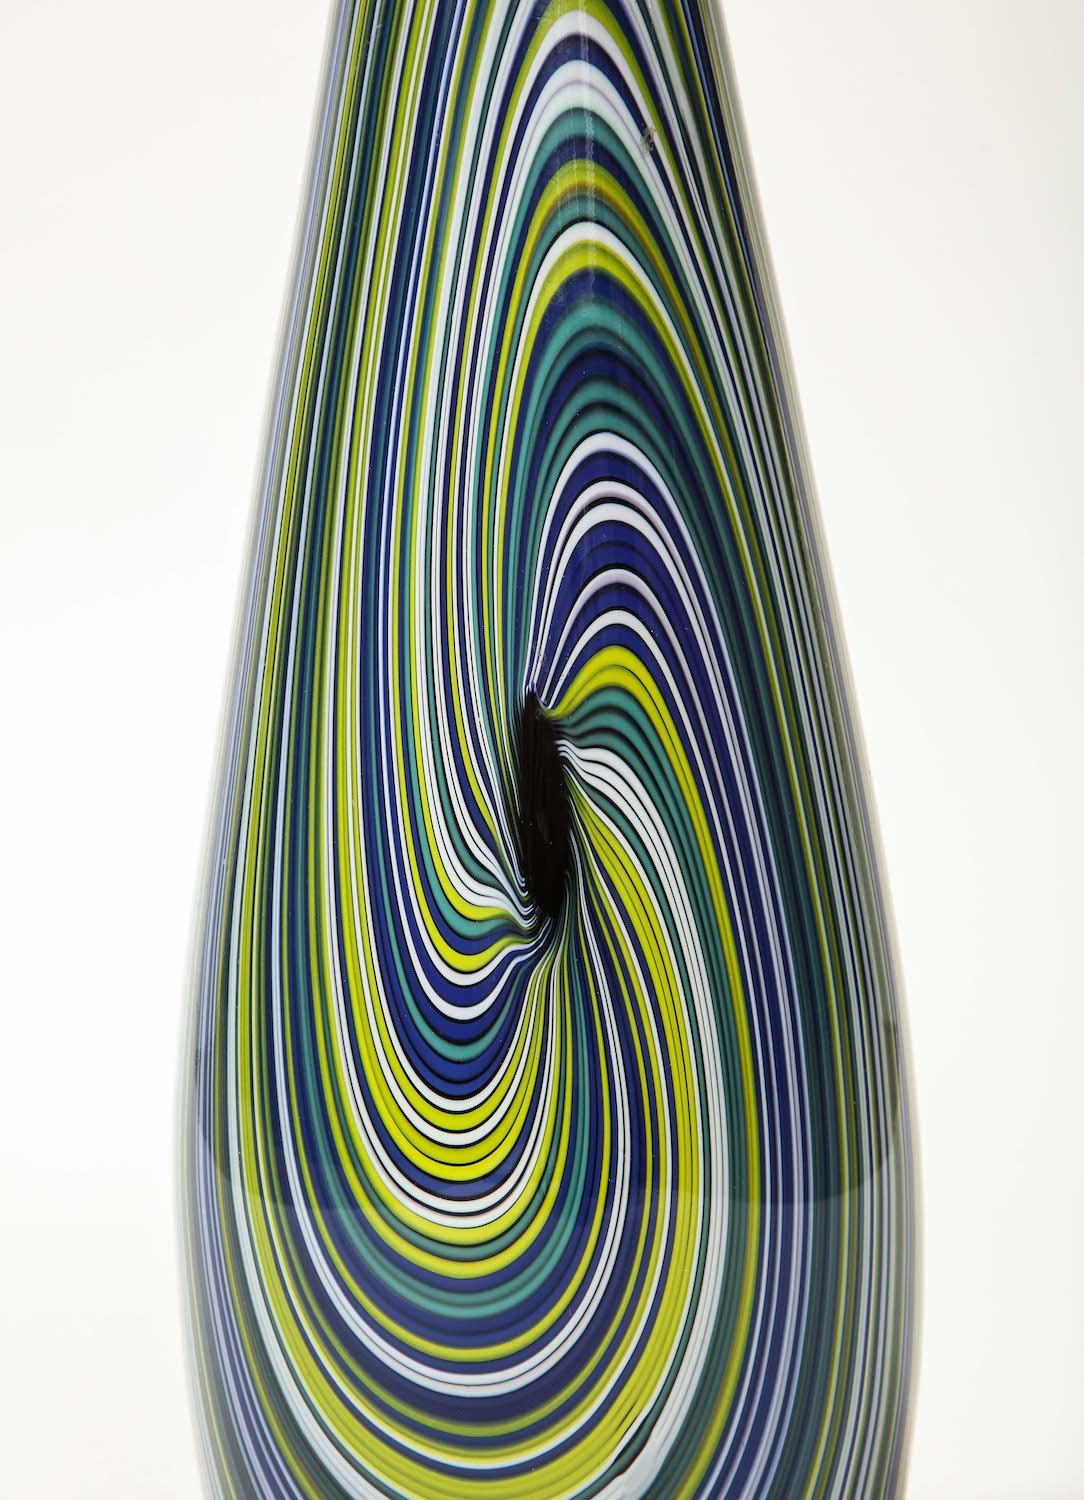 Hand-Blown Vase By Mario Ticco for VeArt